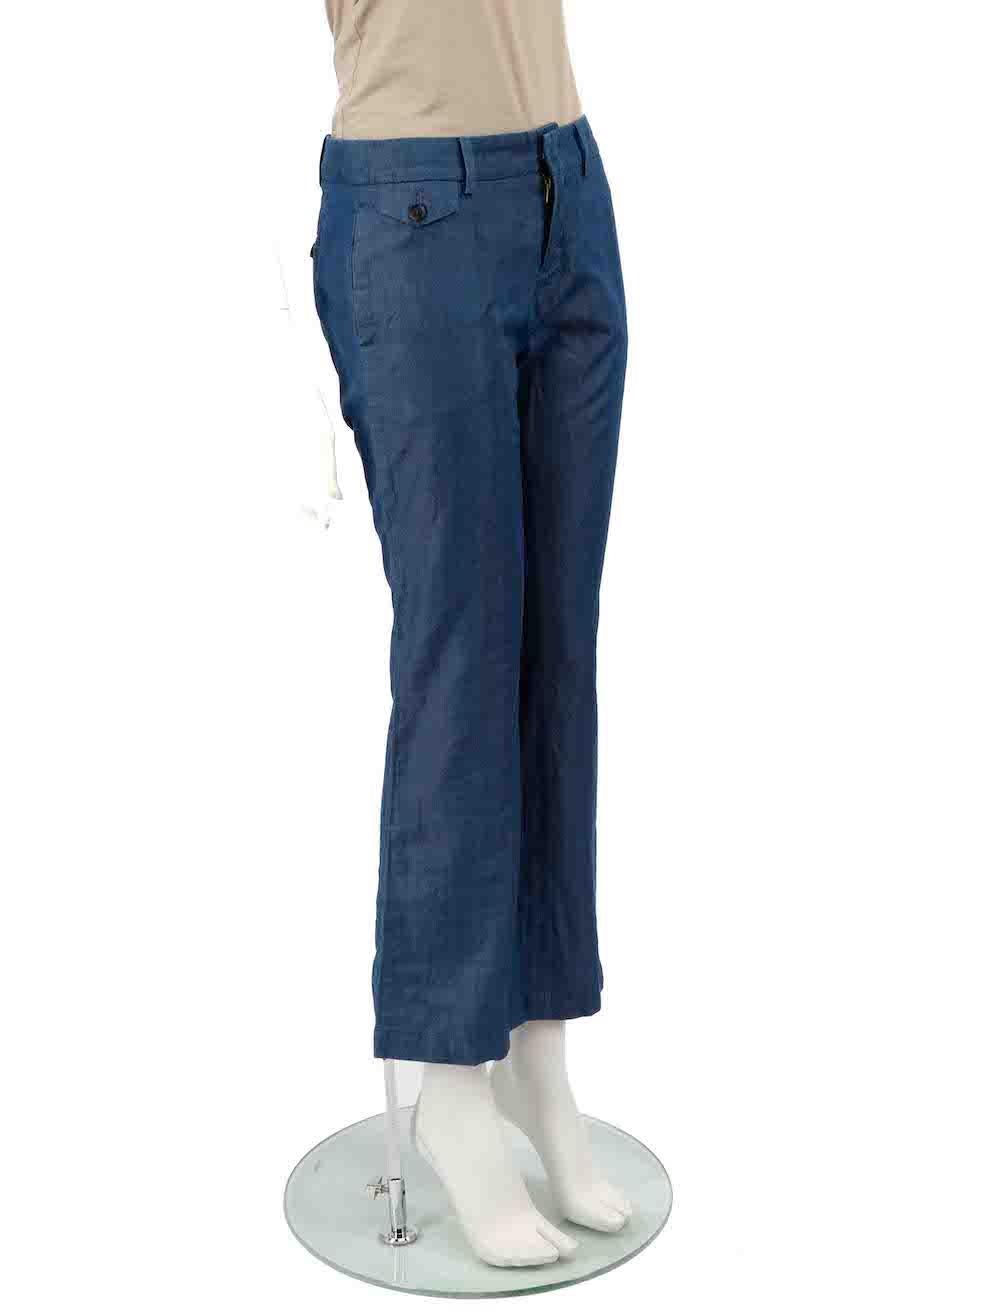 CONDITION is Very good. Hardly any visible wear to trousers is evident on this used Gucci designer resale item.
 
 
 
 Details
 
 
 Blue
 
 Lightweight denim
 
 Trousers
 
 Flared leg
 
 Low rise
 
 3x Front pockets
 
 1x Back pocket
 
 Fly zip,